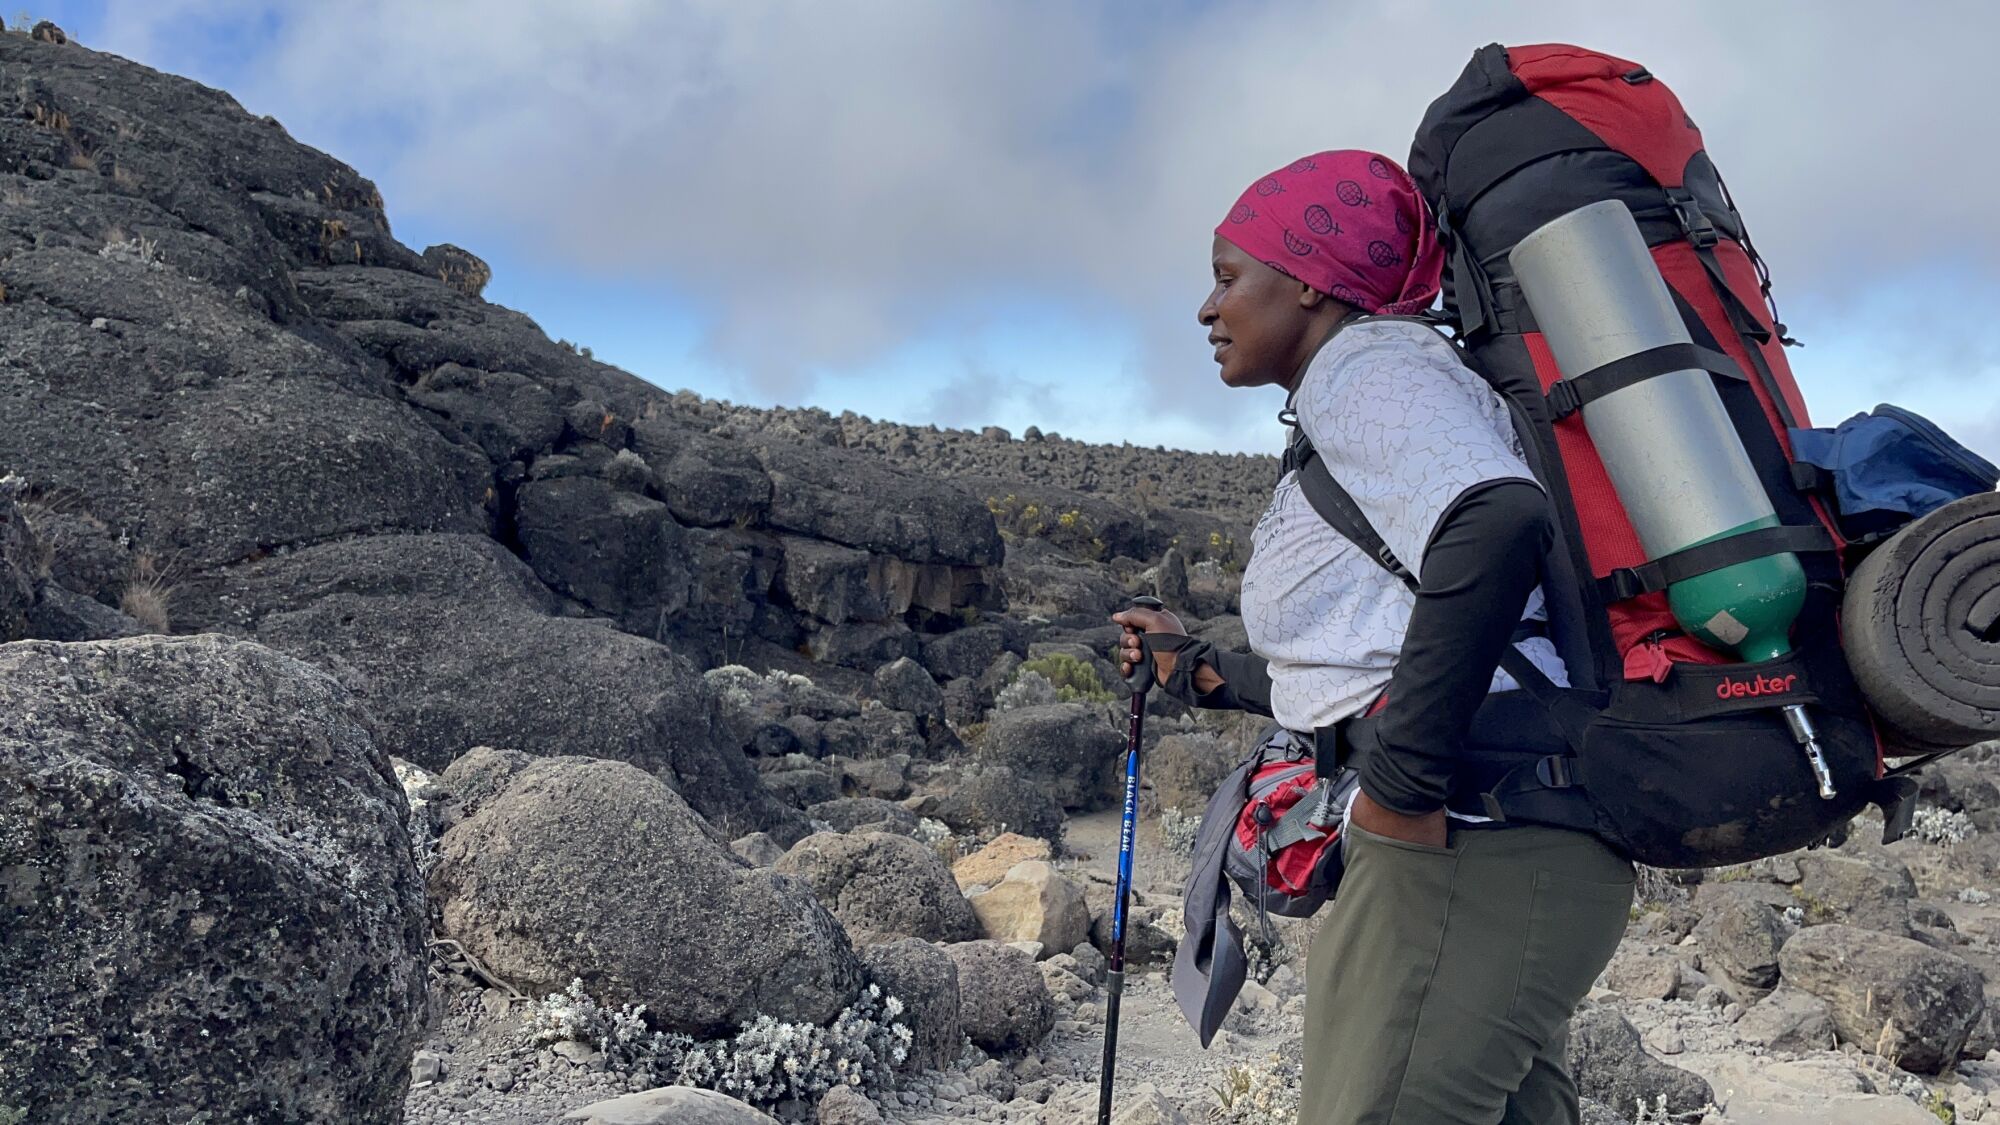 A woman in a red bandana holds a walking stick and carries a large red-and-black backpack in a mountain setting